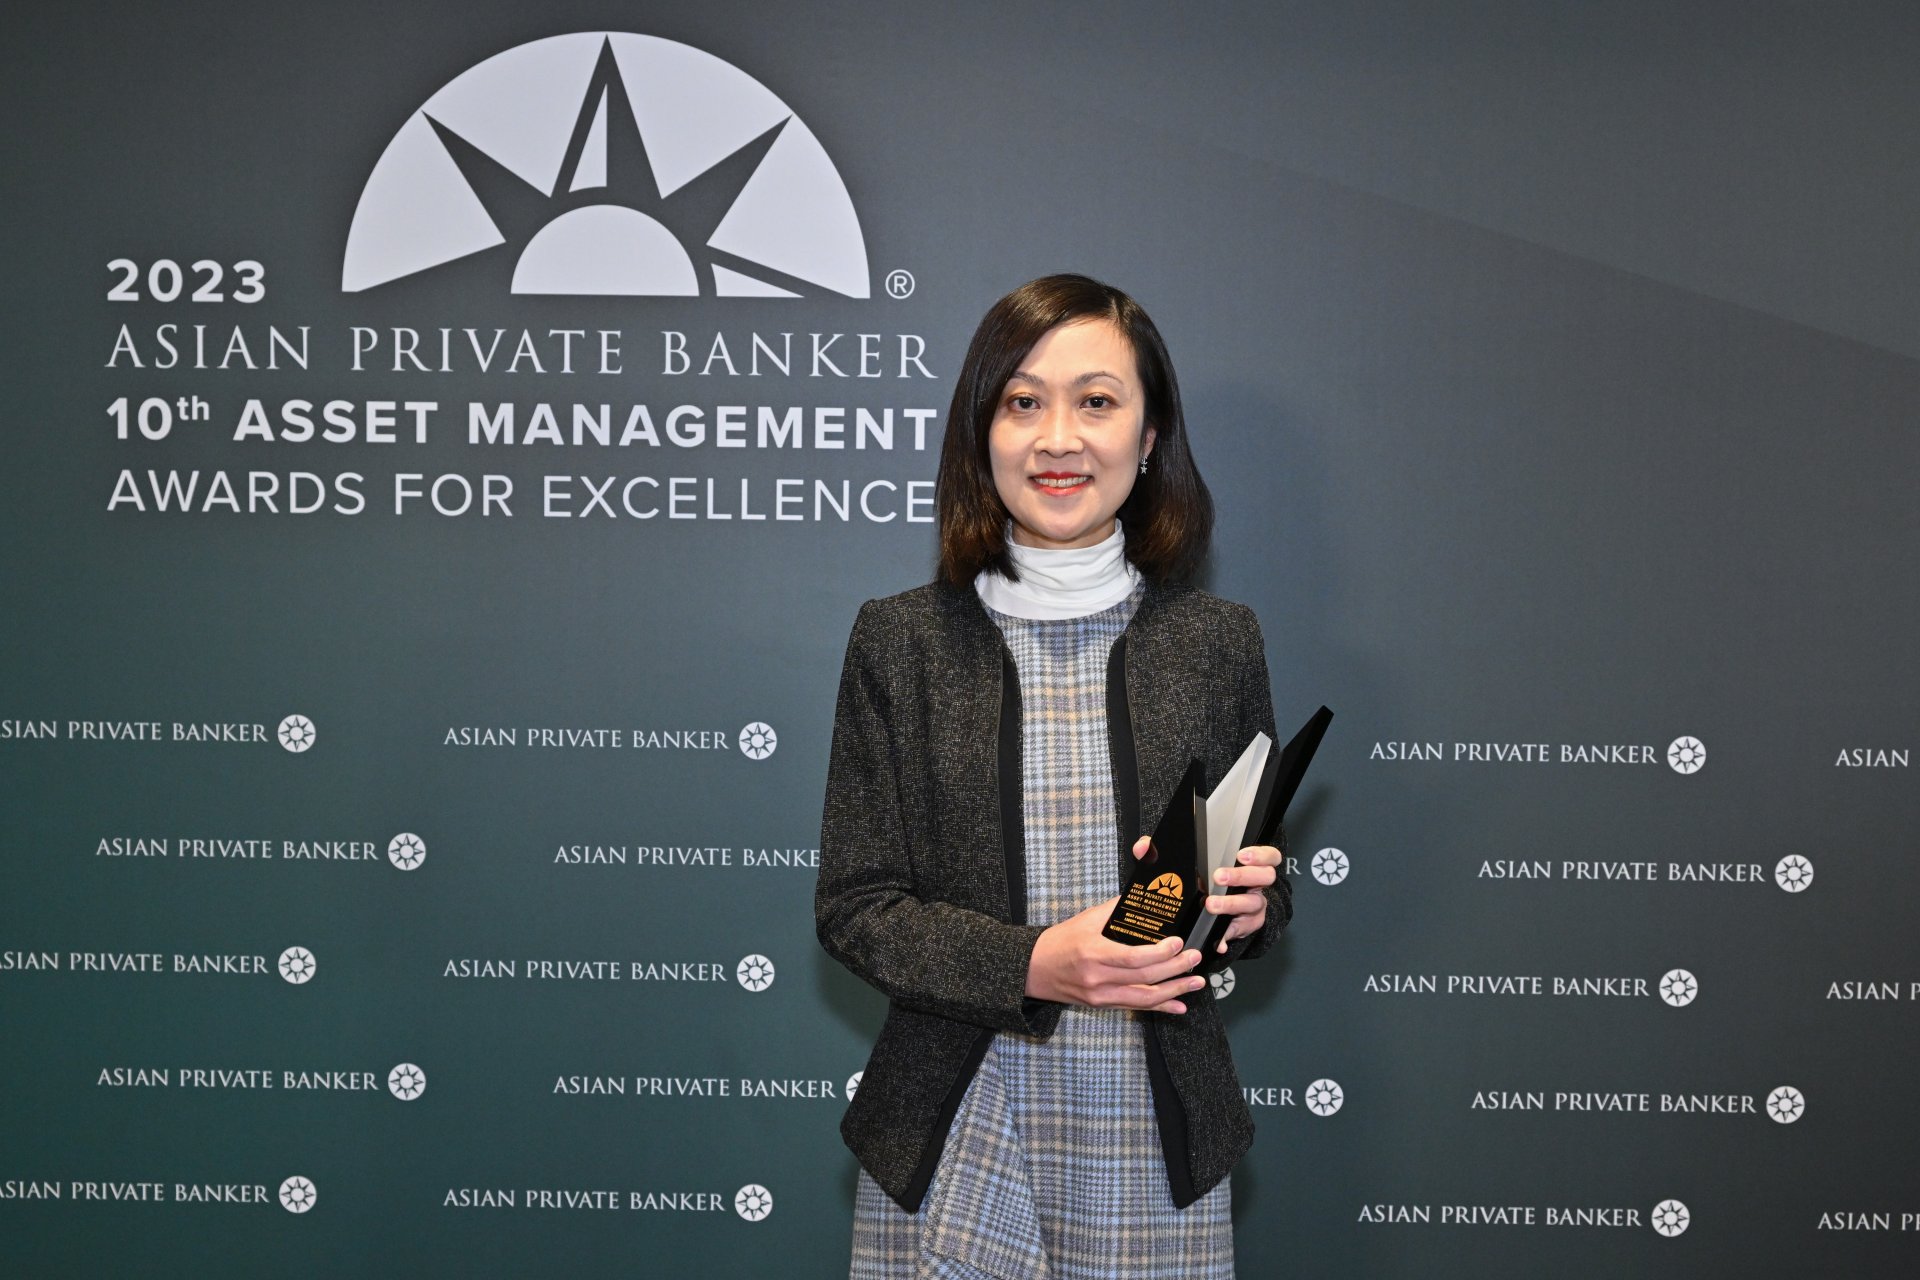 Accepting Best Fund Provider - Liquid Alternative at Asian Private Banker’s 10th Asset Management Awards for Excellence is Pauline Cheng